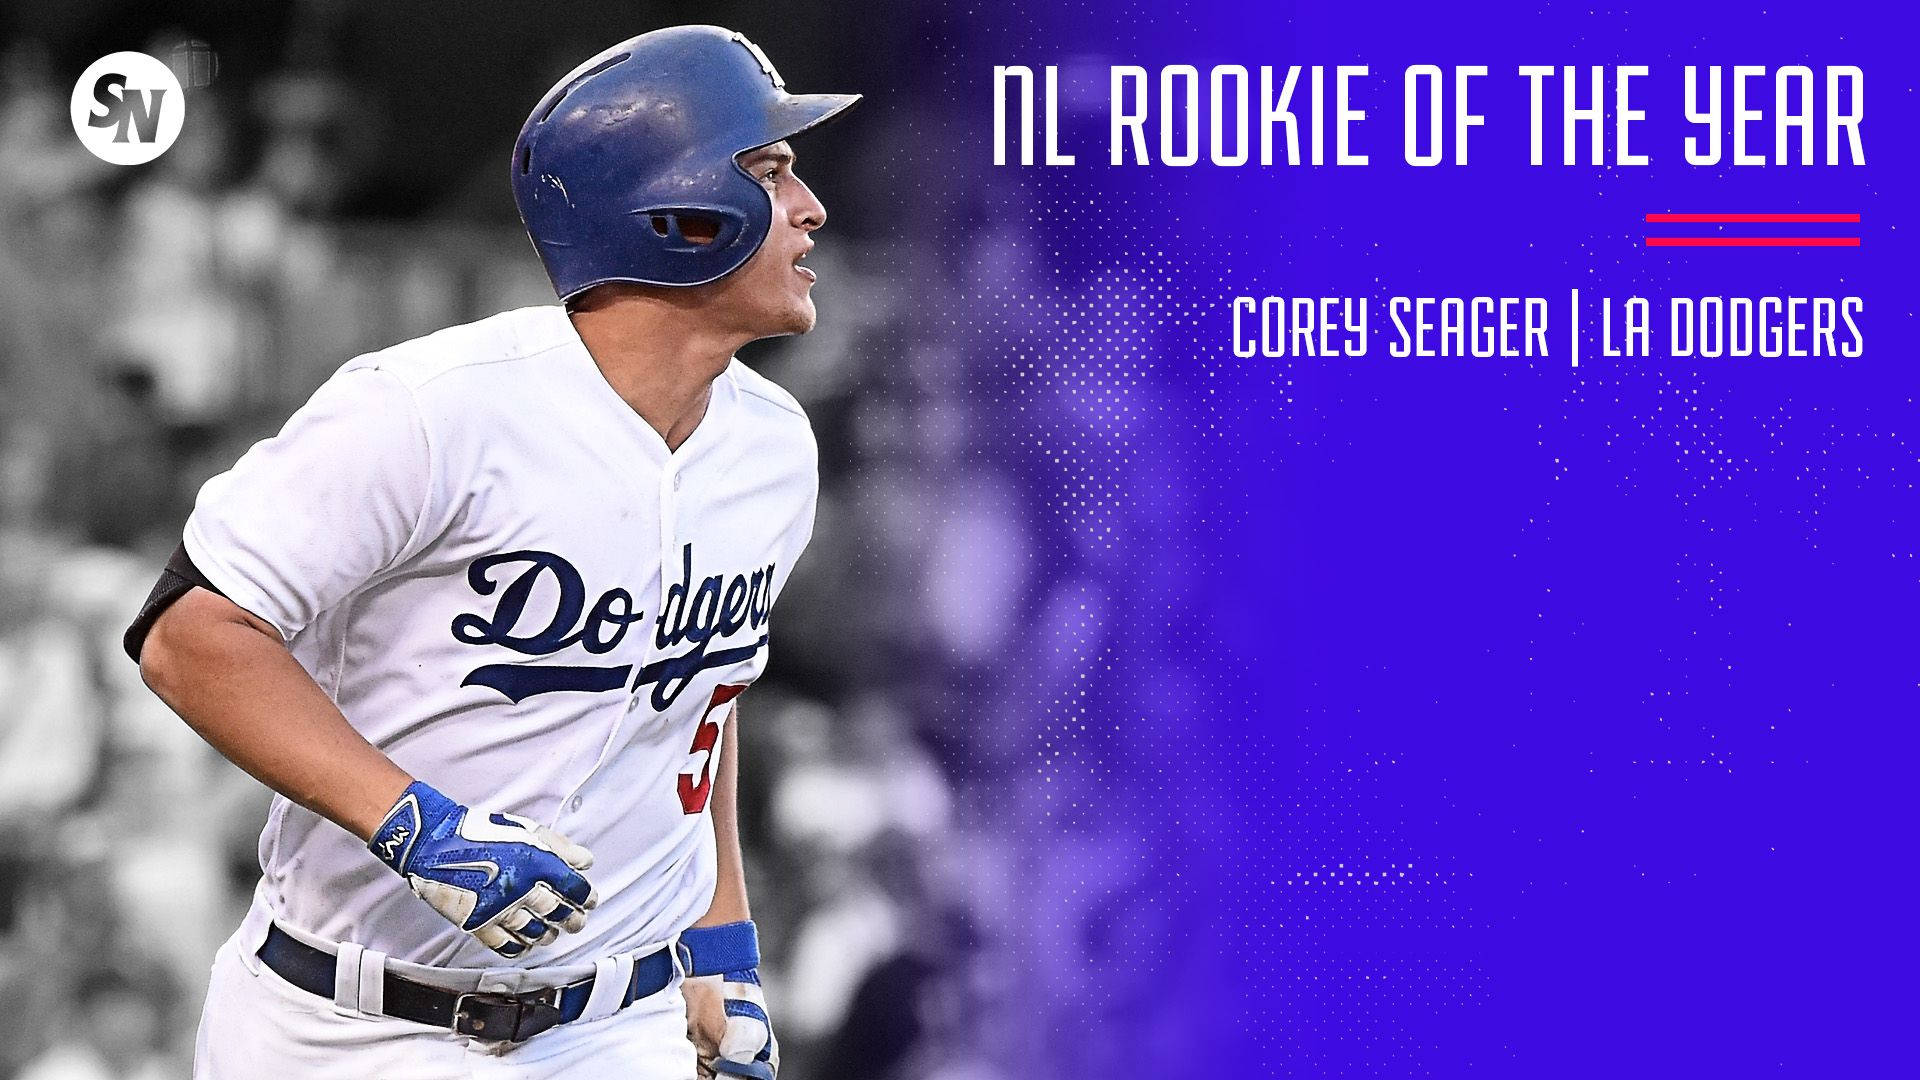 Corey Seager Nl Rookie Of The Year